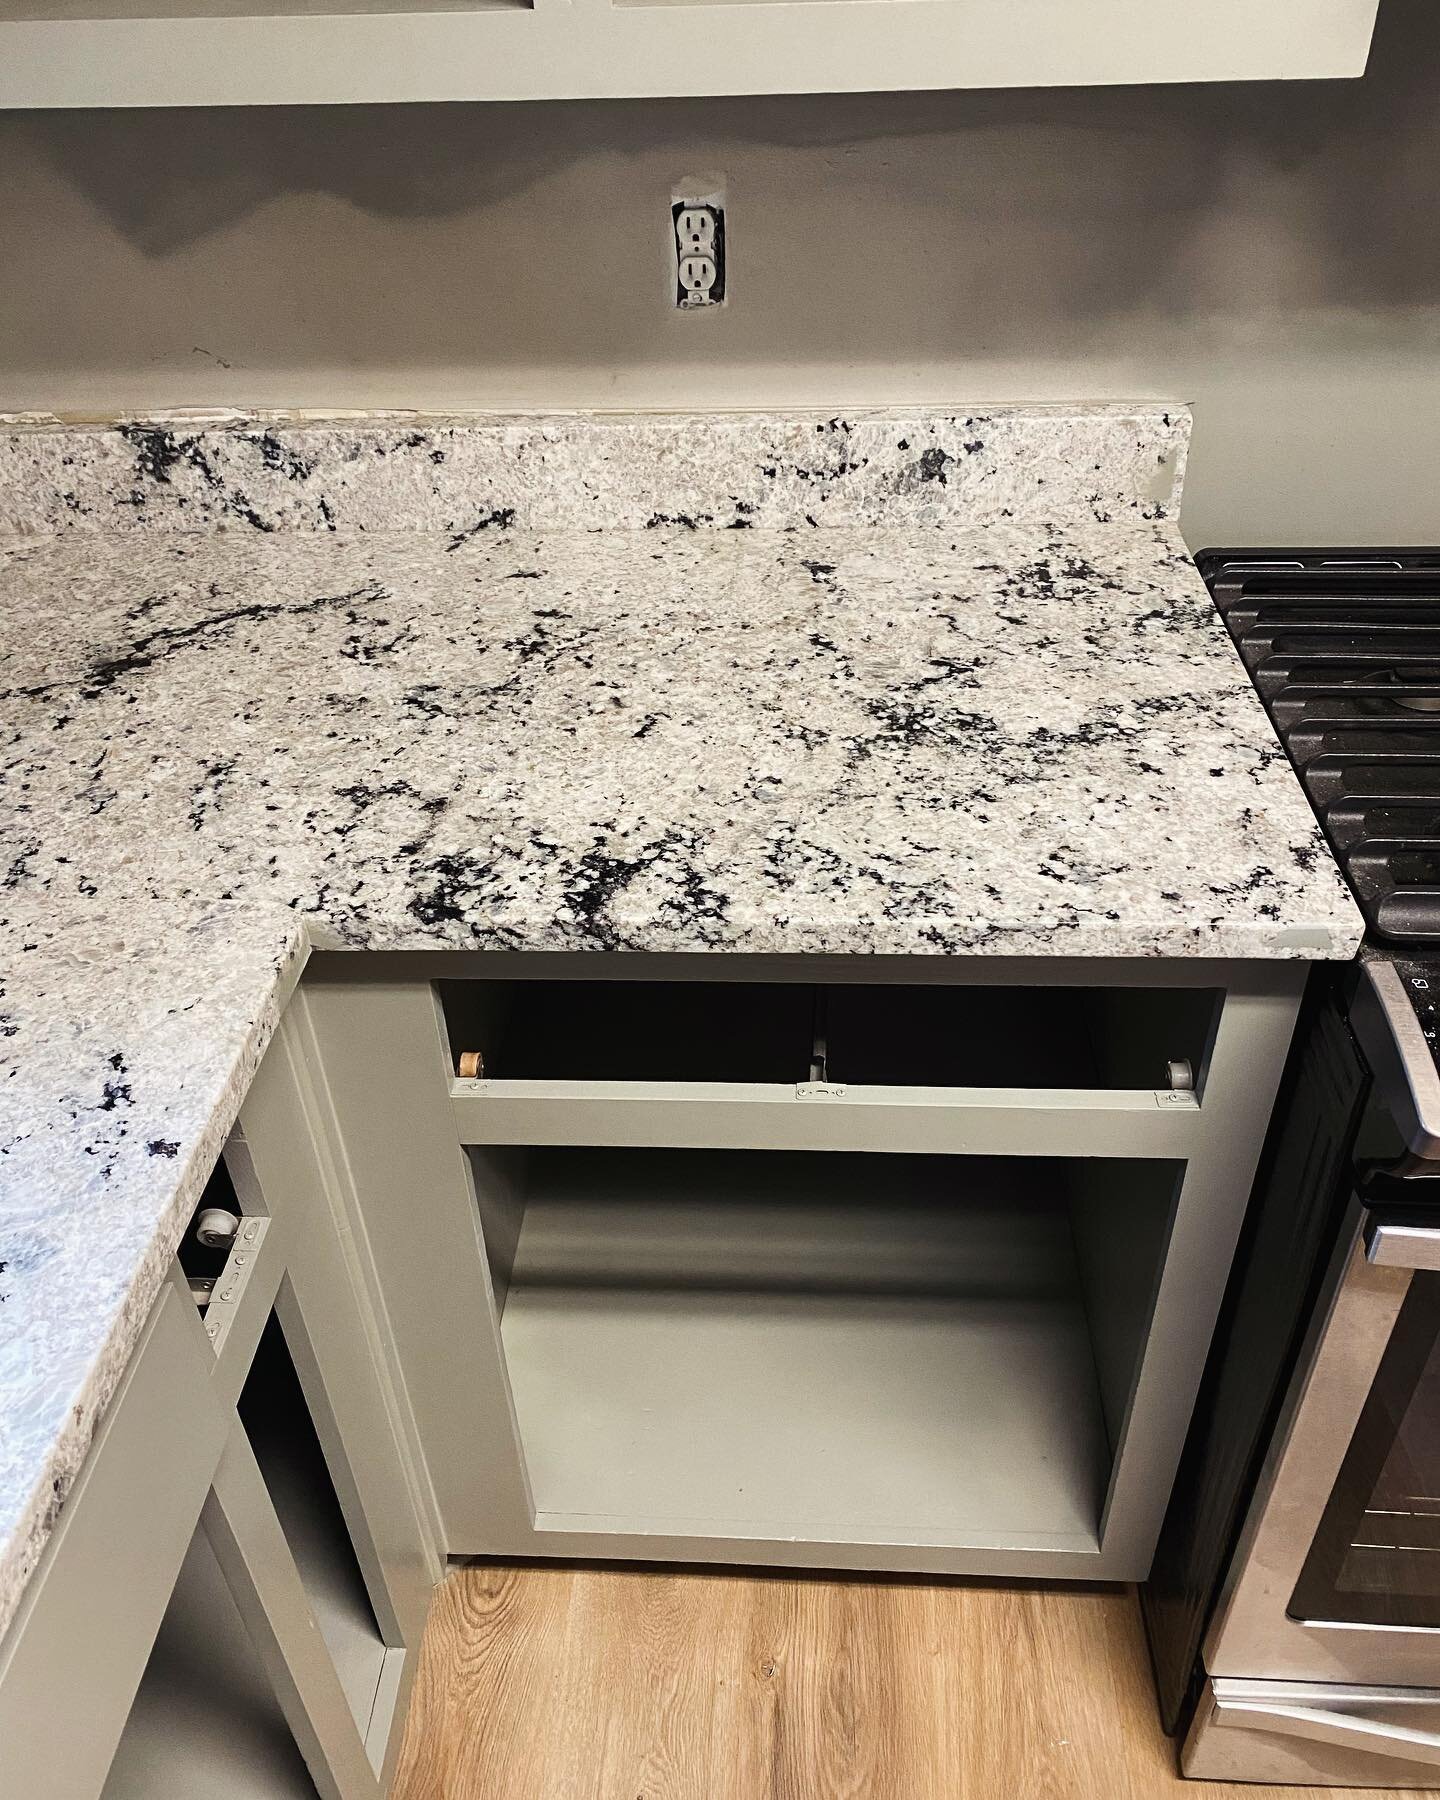 Love the new cabinet color with this new granite in this almost completed kitchen! Wall color and hardware coming soon! @laura_deann_jones @jasoncannonjones Hashtags:
#interiordesignerlife
#awardwinninginteriordesigner #awardwinningkitchendesigner #a